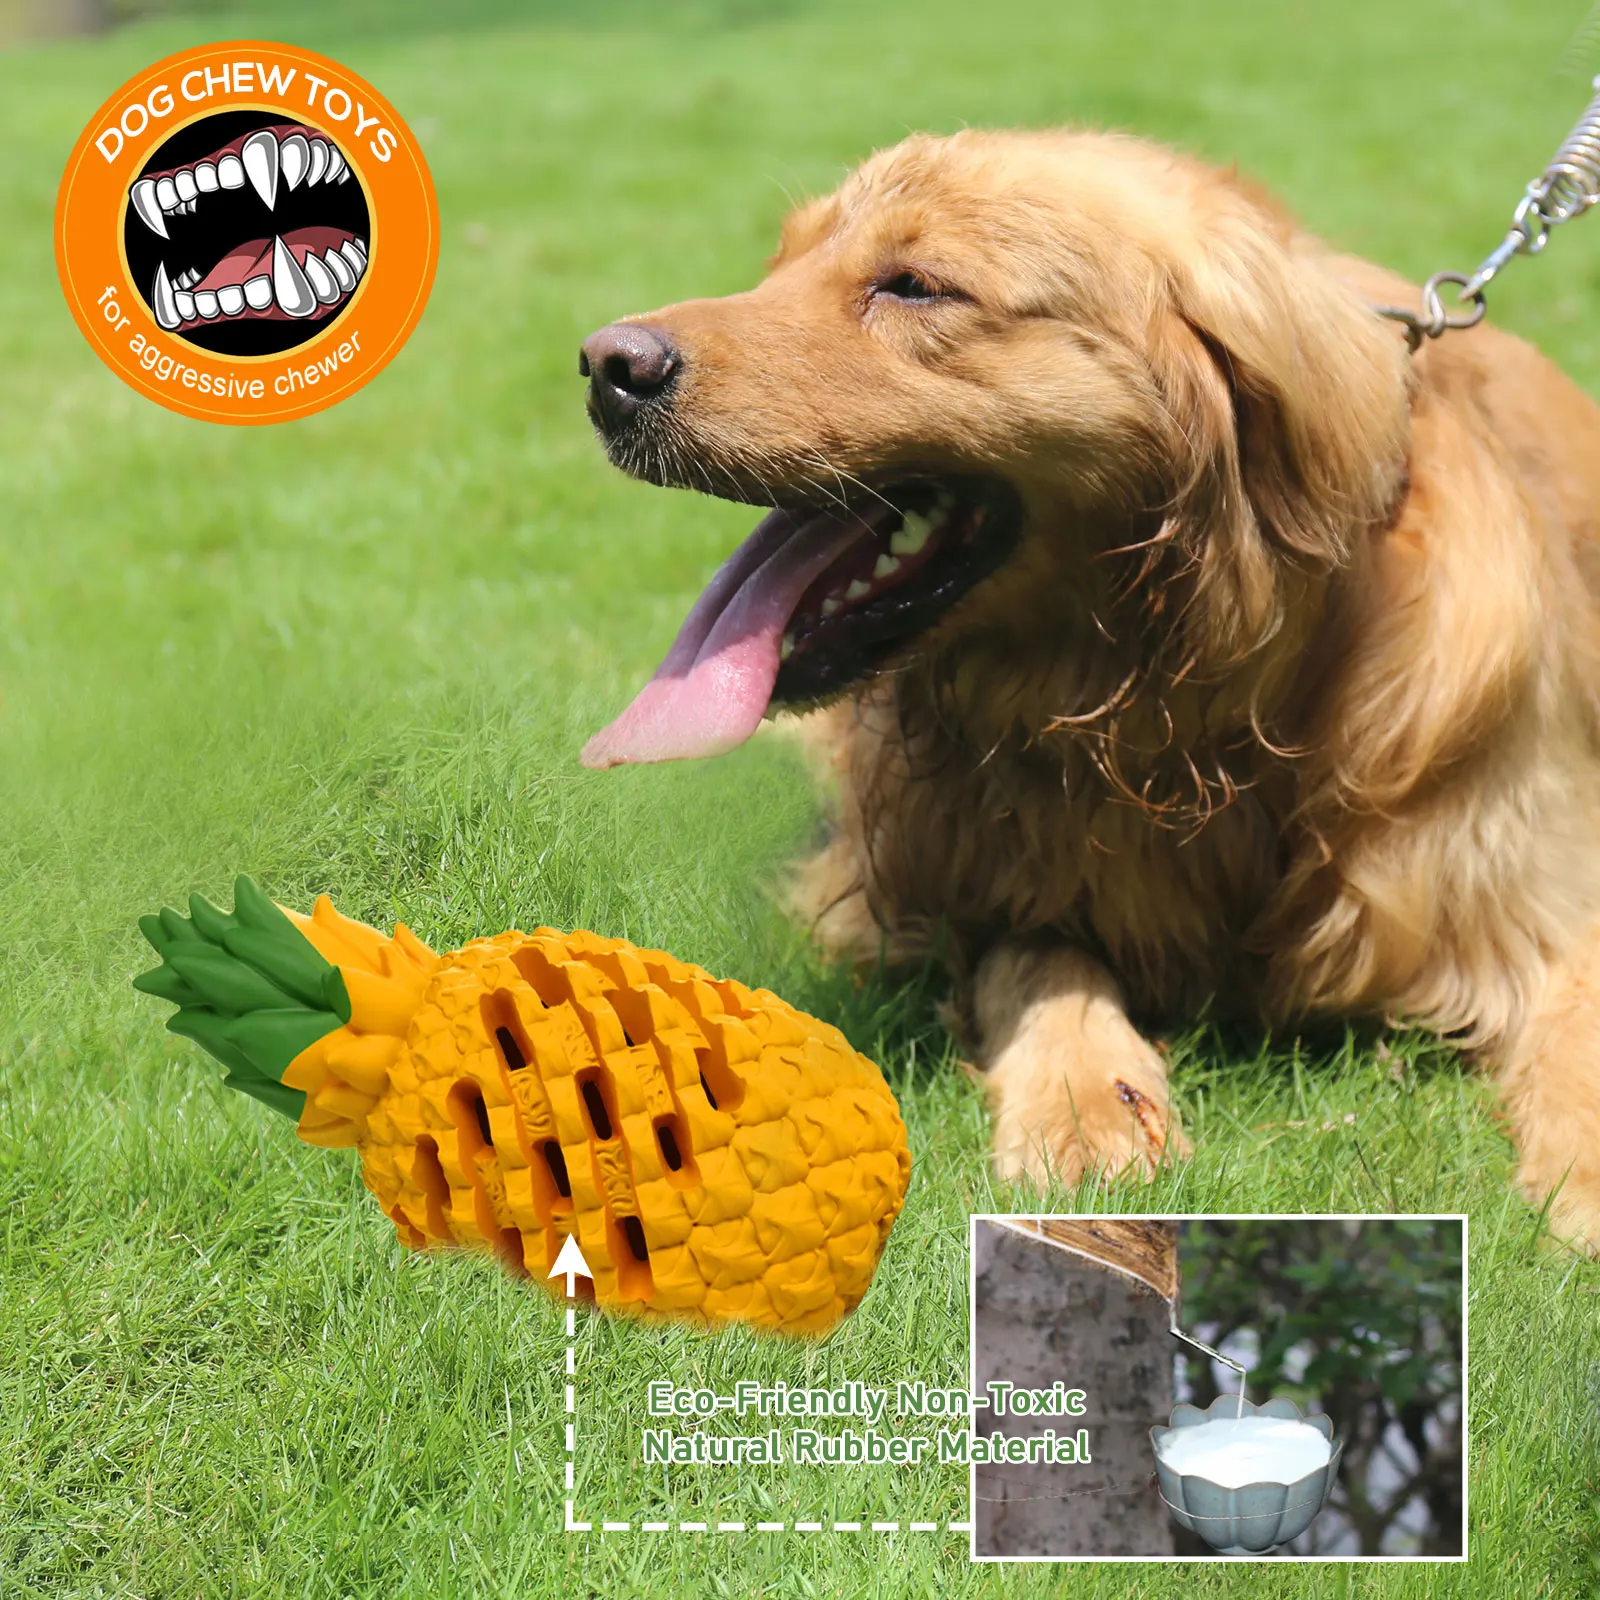 

Dog Chew Toys for Aggressive Chewer, Tough Dog Dental Chews Toy, Indestructible DogToys for Large Dogs Puppy Chew Toys,Pineapple